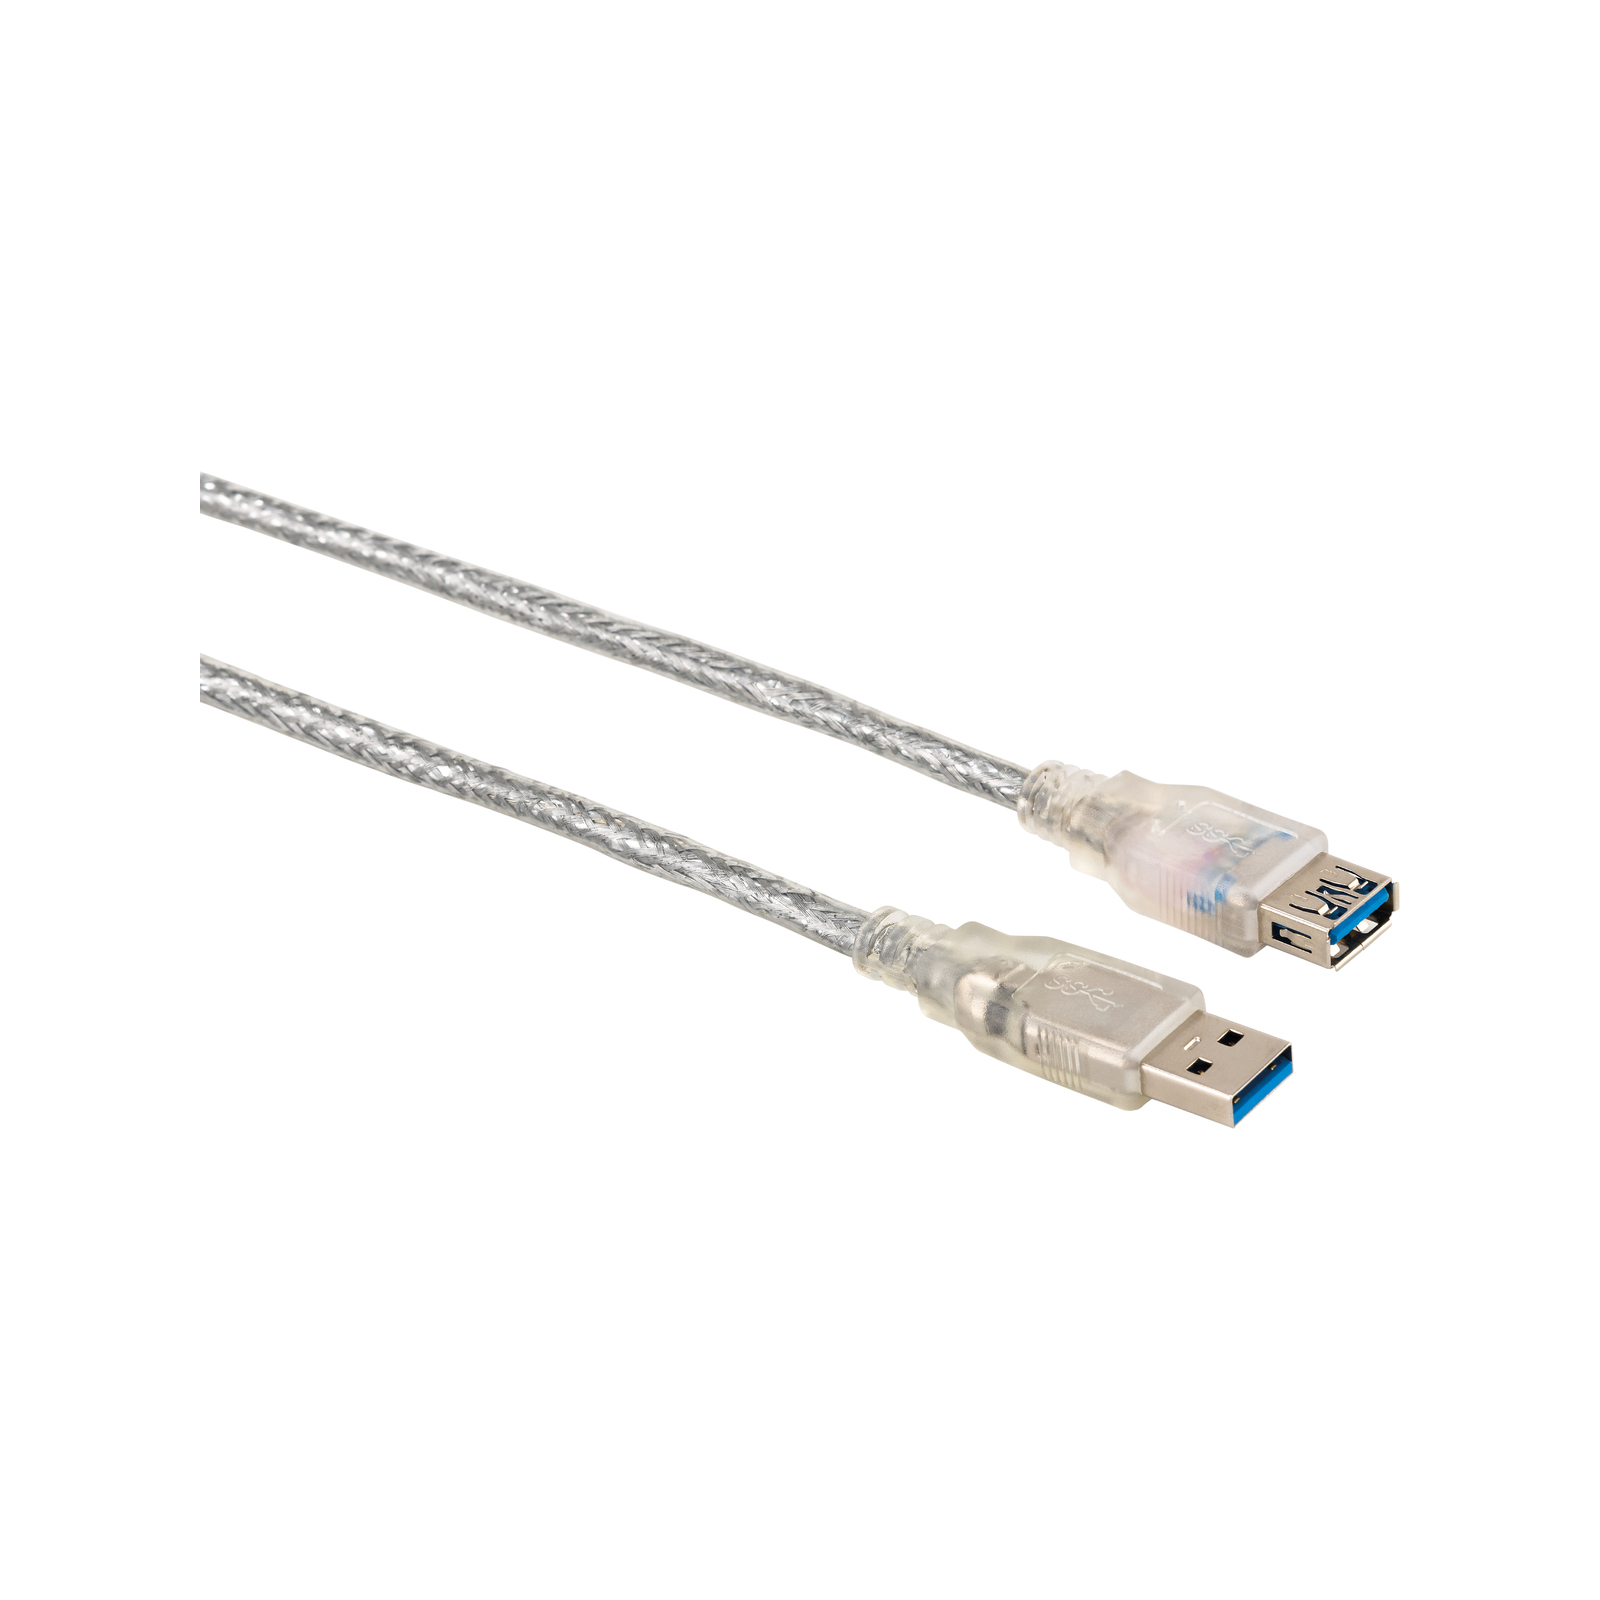 Antsig 5m USB-A Male To USB-A Extension Cable - Bunnings Australia